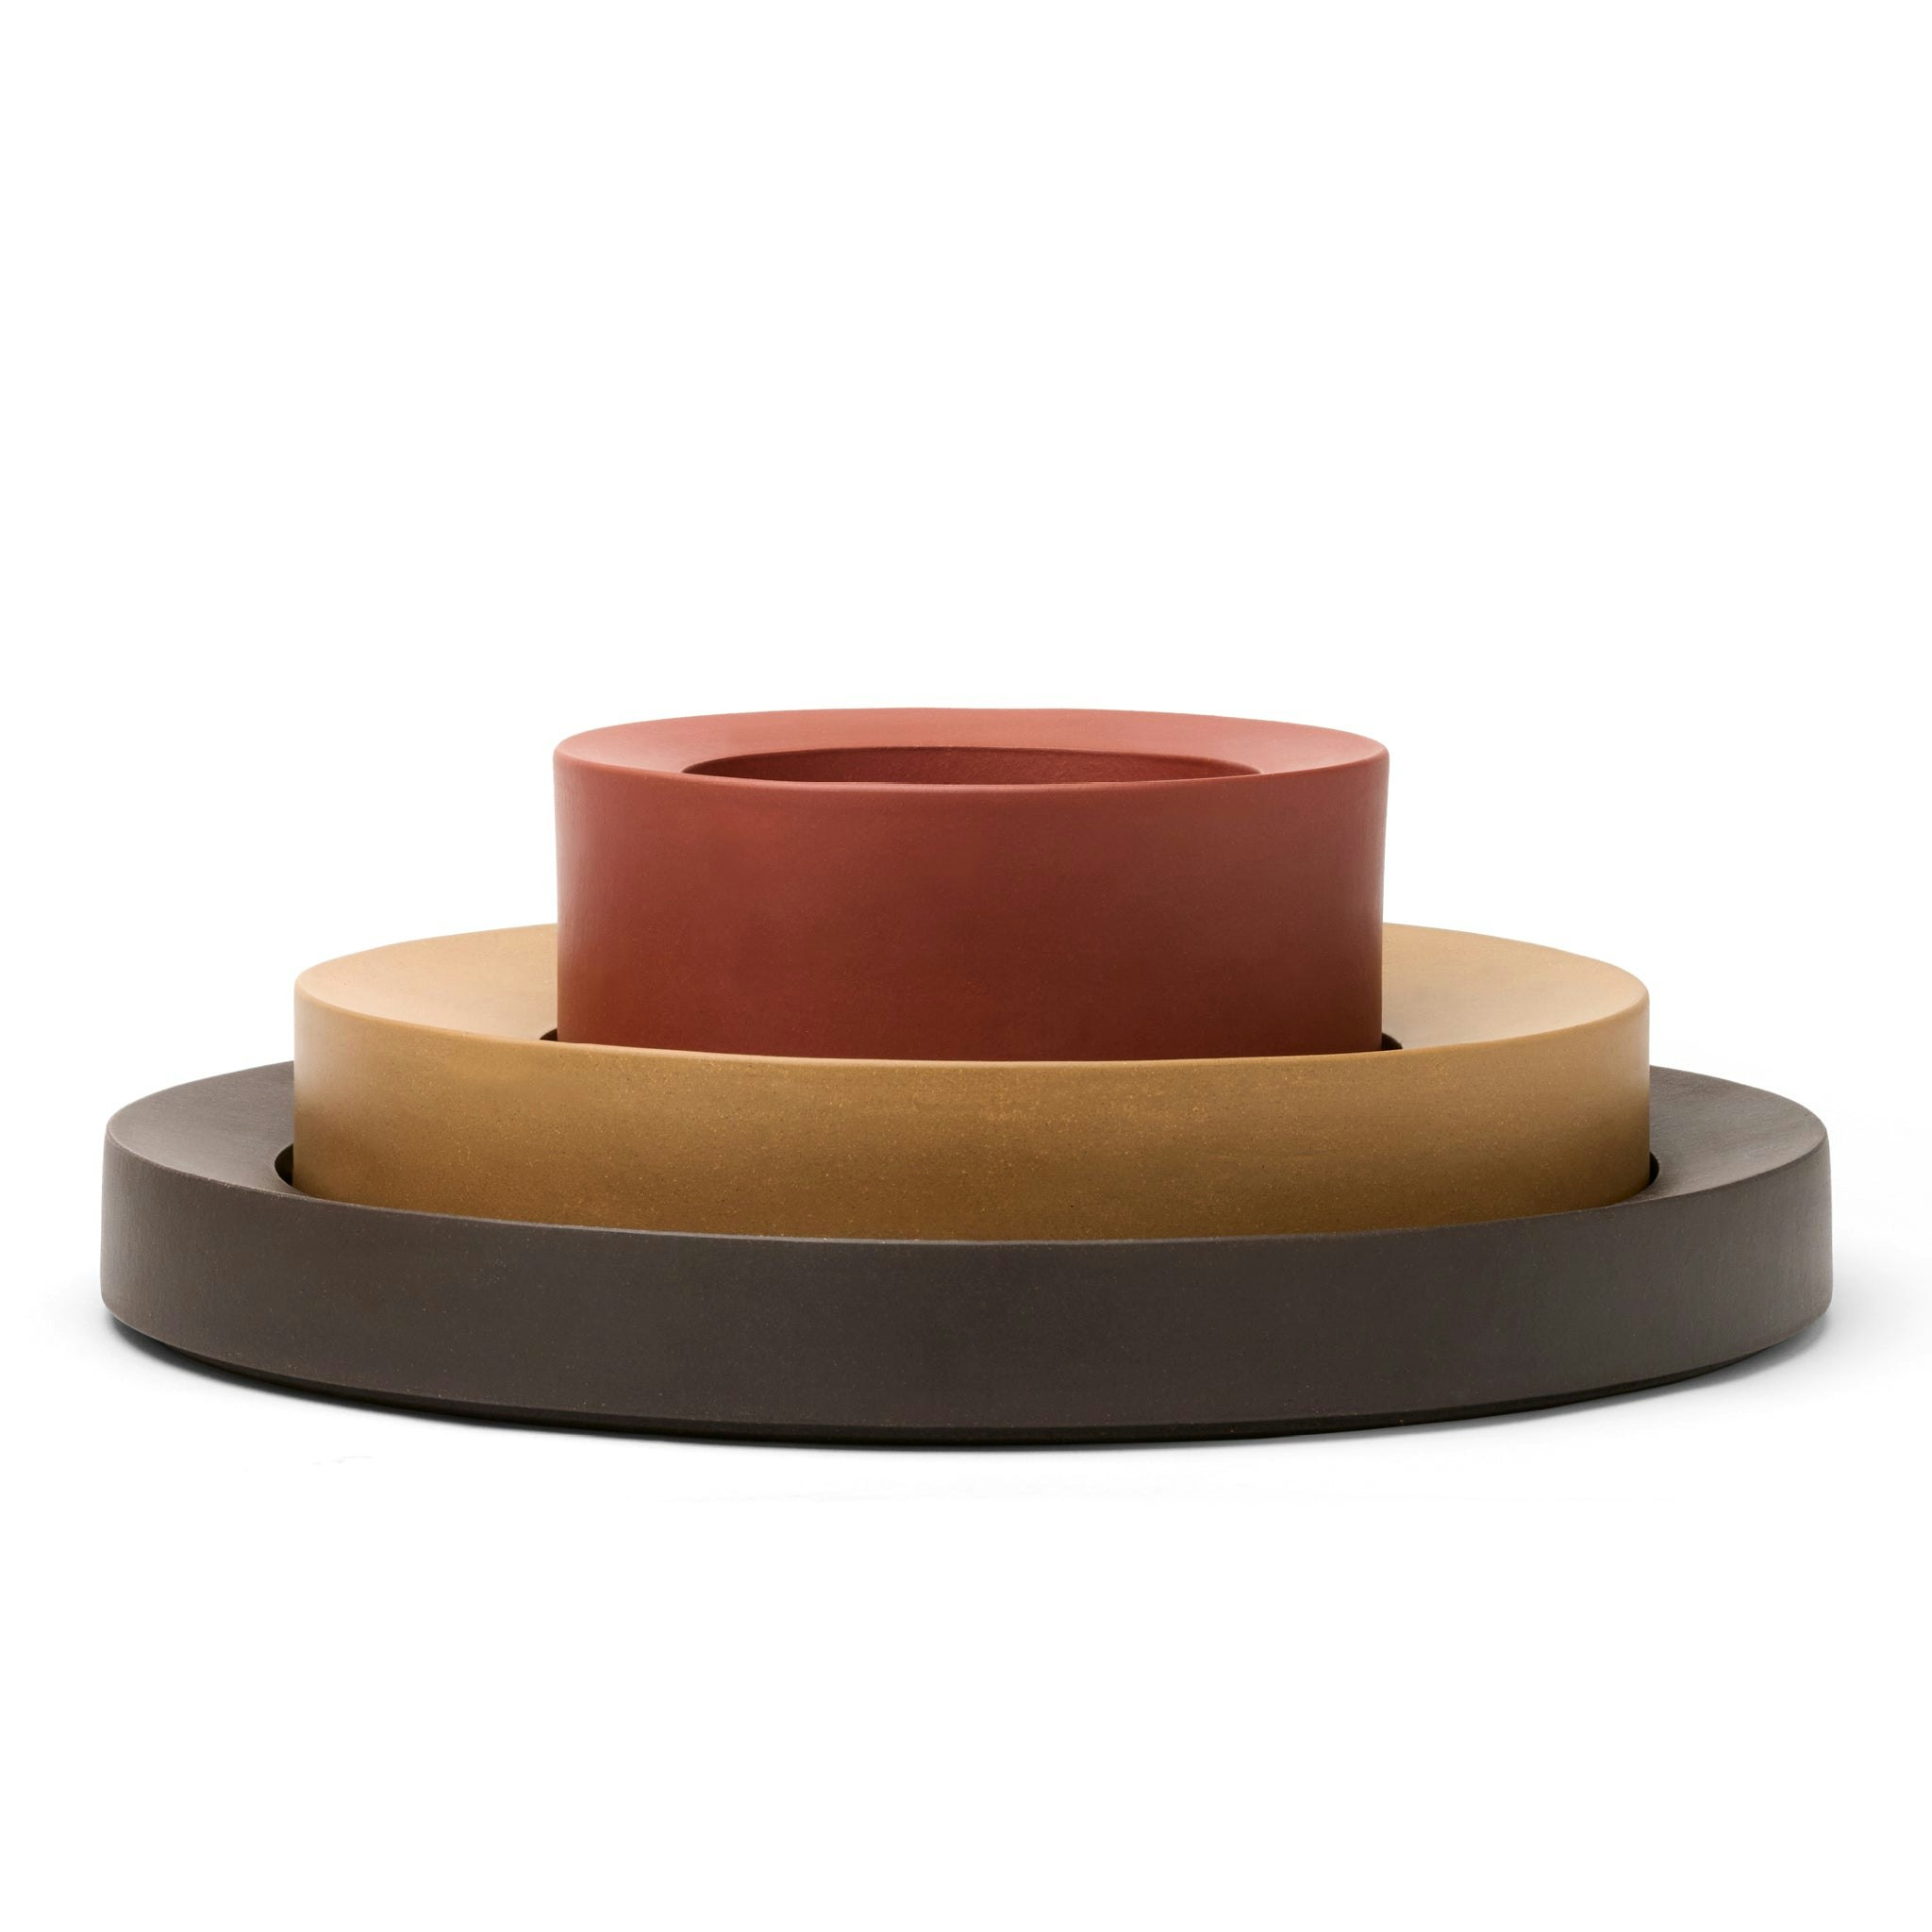 Set of Bowls by Neri & Hu for When Objects Work